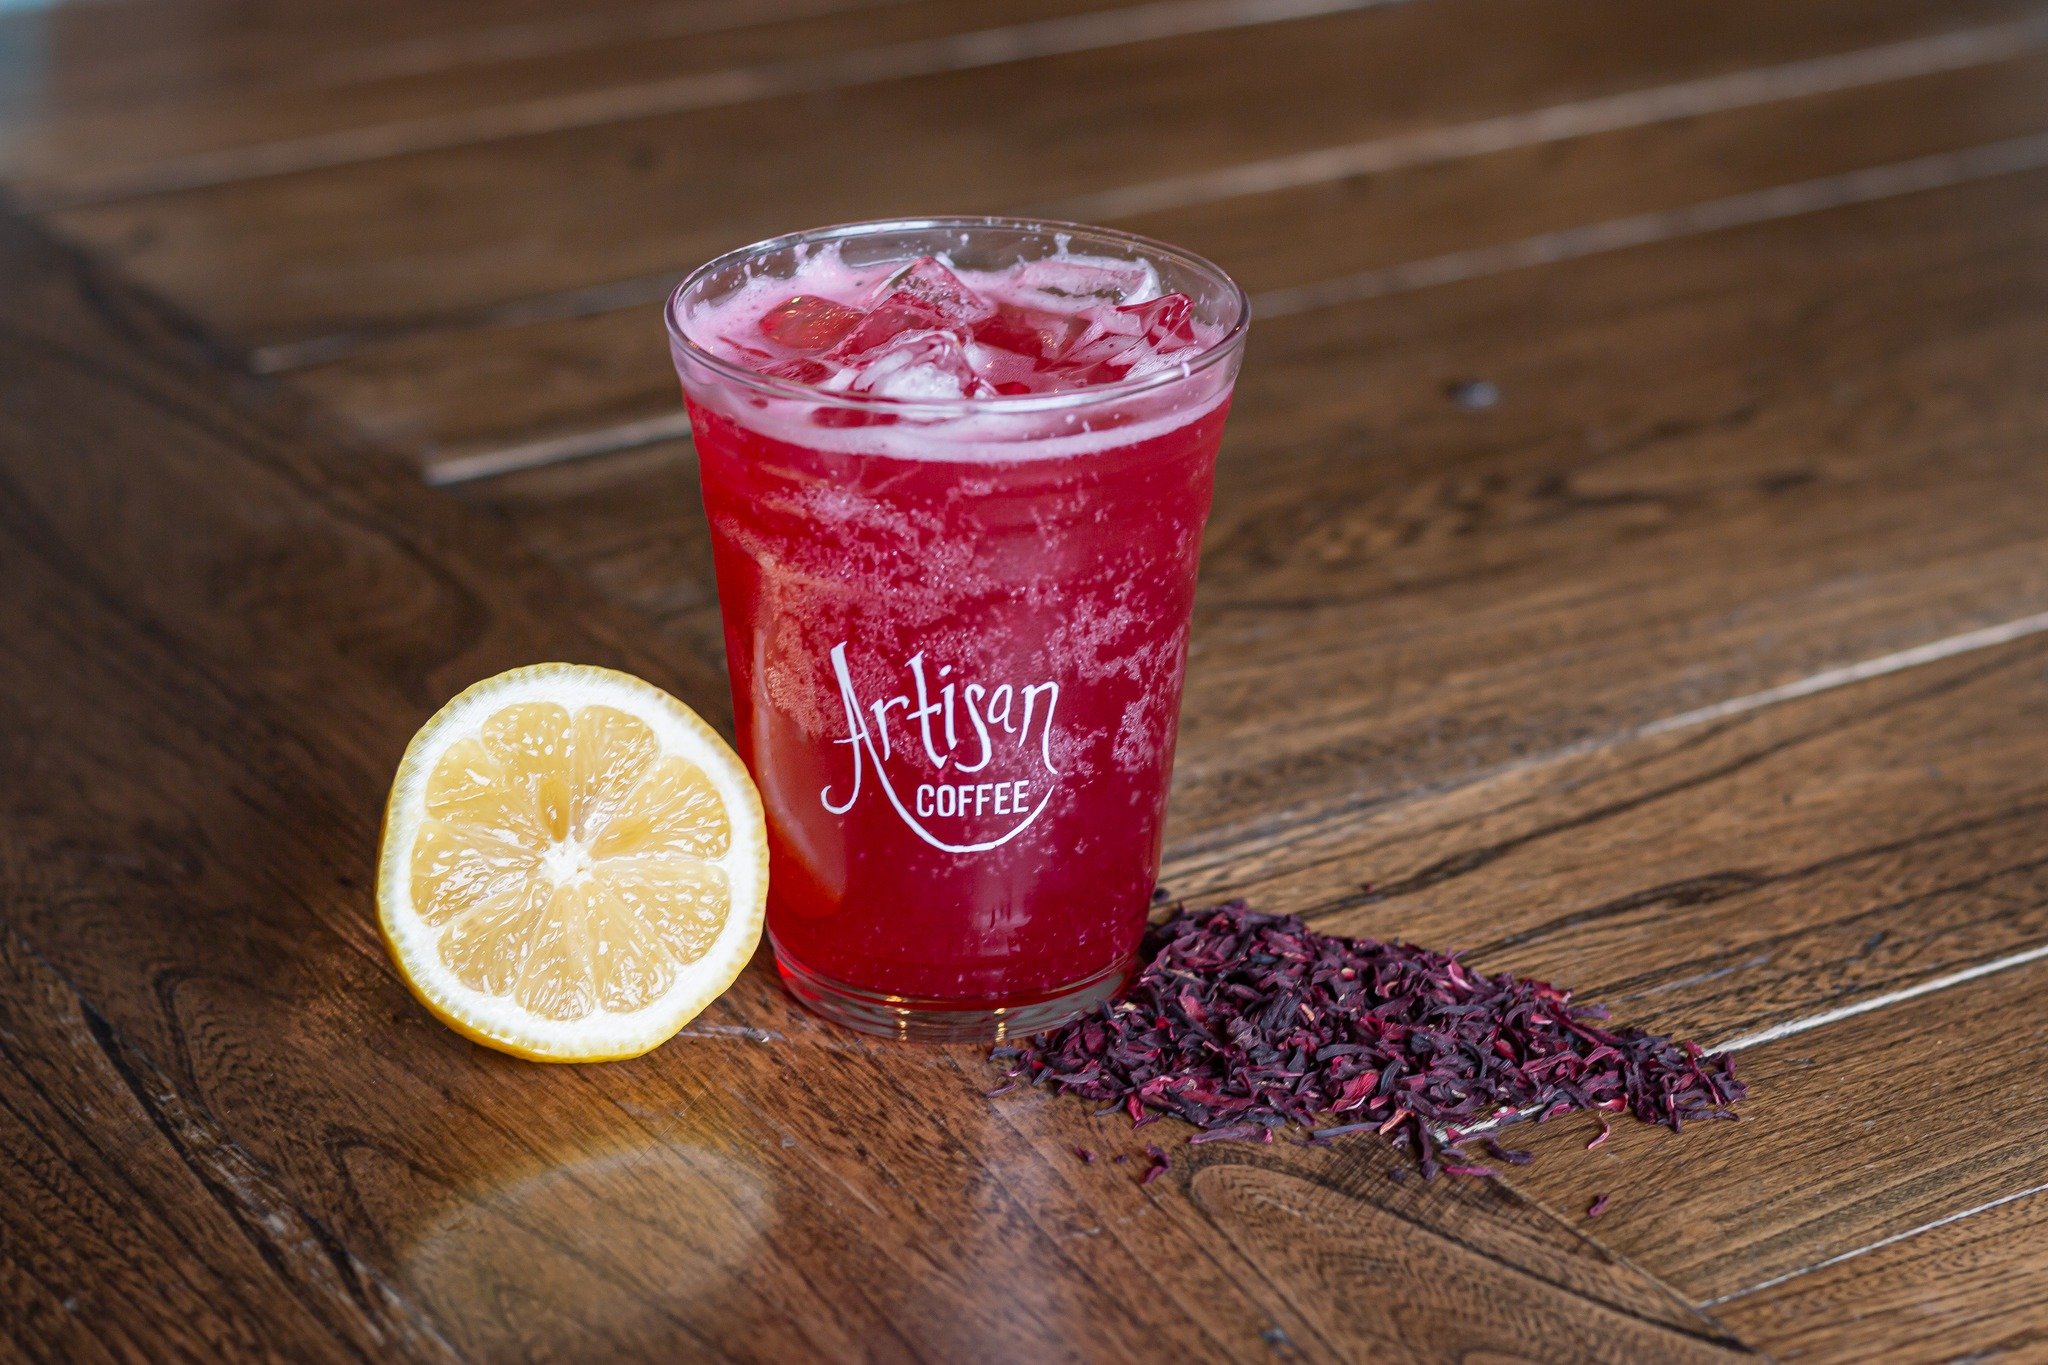 It's that time! Our Summer Sparkle menu has returned. ✨

We have four drinks joining the menu, including our brand-new Hibiscus Sparkling Lemonade! 🌺🍋

This drink features house-made hibiscus syrup, lemon juice, seltzer, and, of course, ice. It is 